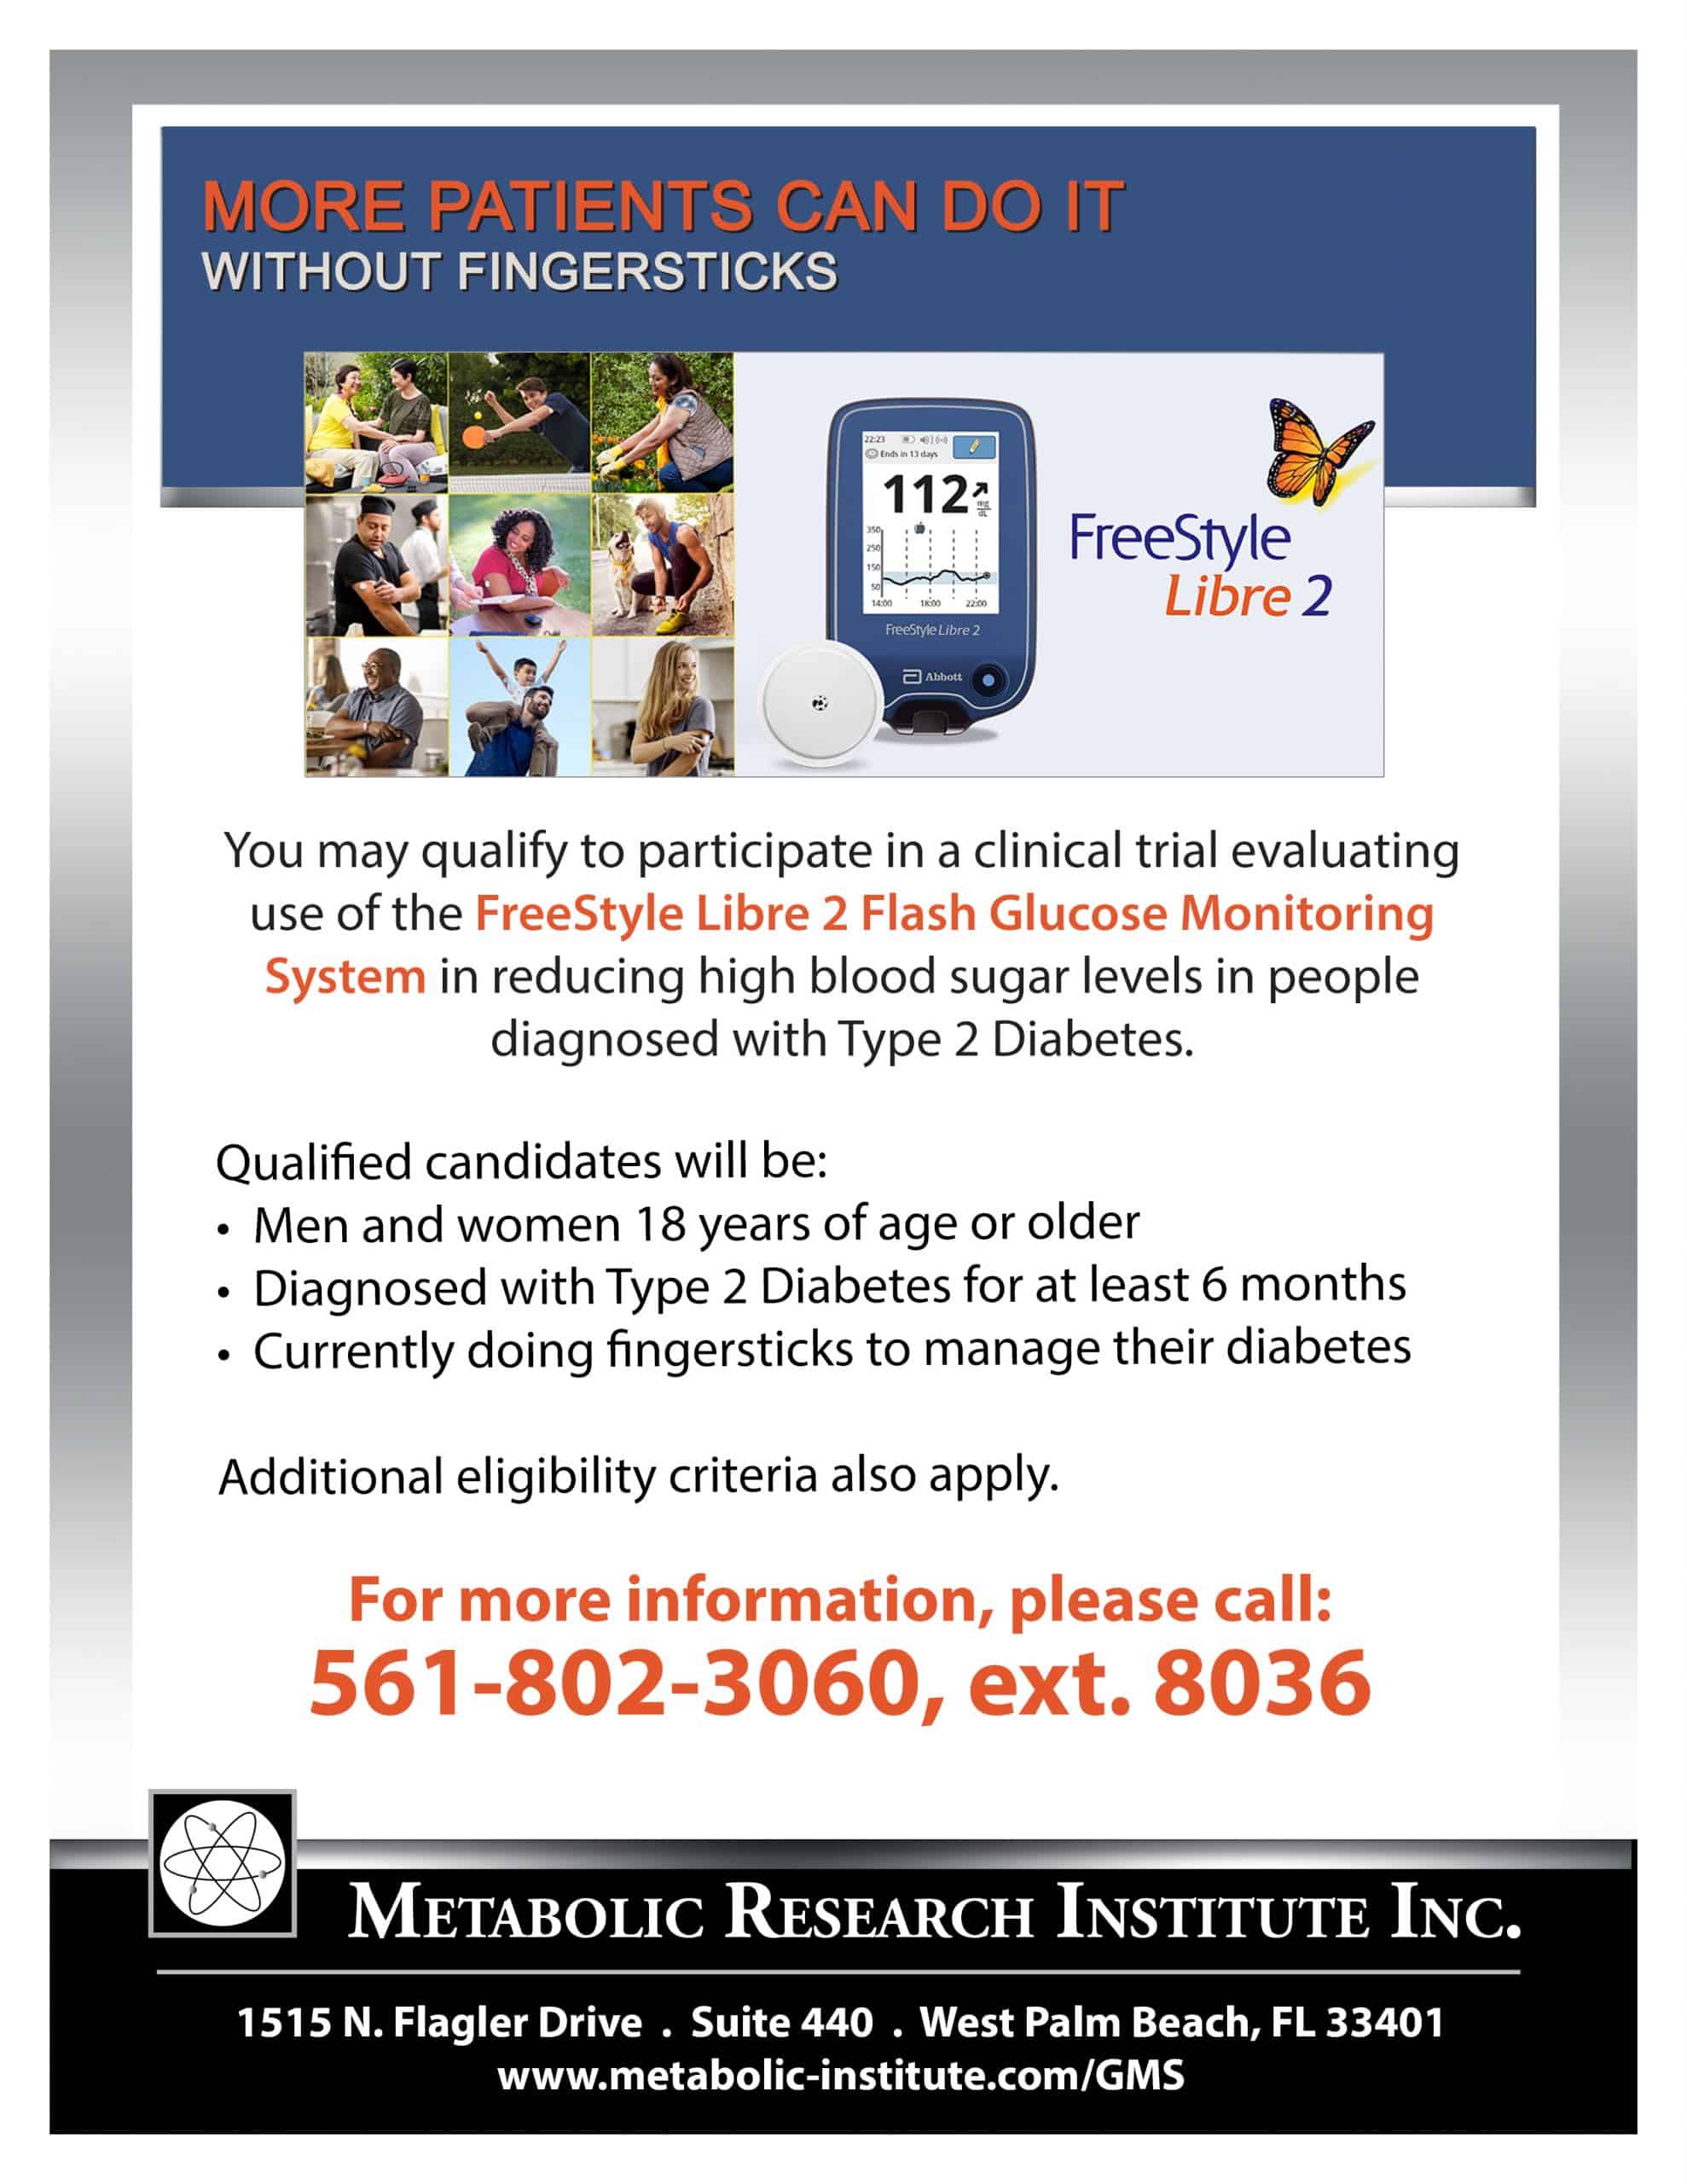 Freestyle Libre 2 Flash Glucose Monitoring System Clinical Study Flyer